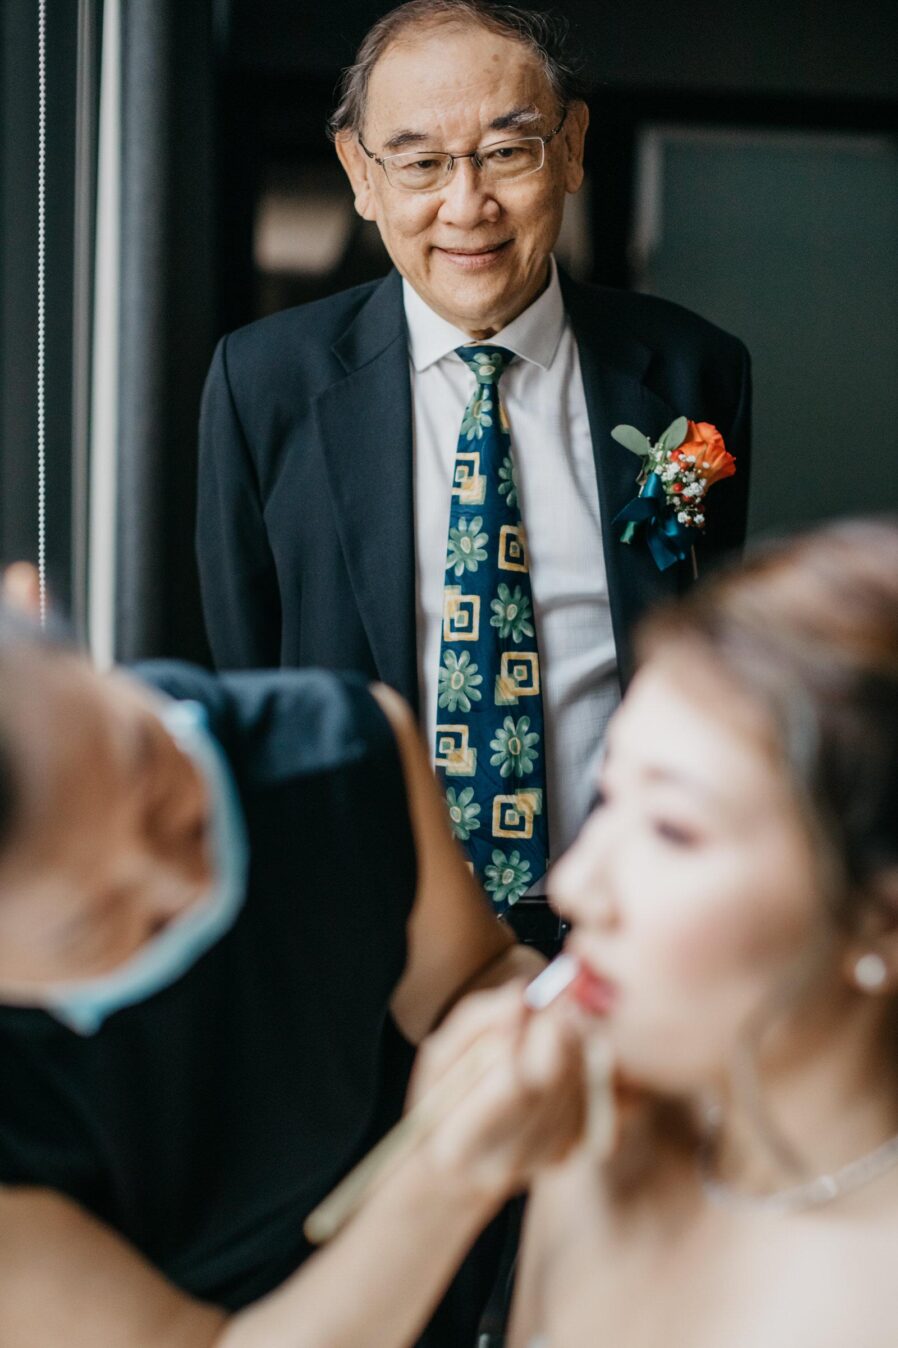 Daddy Girl A Rooftop Poolside Wedding at Hotel Stripes Kuala Lumpur MCO2.0 Cliff Choong Photography Malaysia Covid19 ROM Bride Make Up Getting Ready